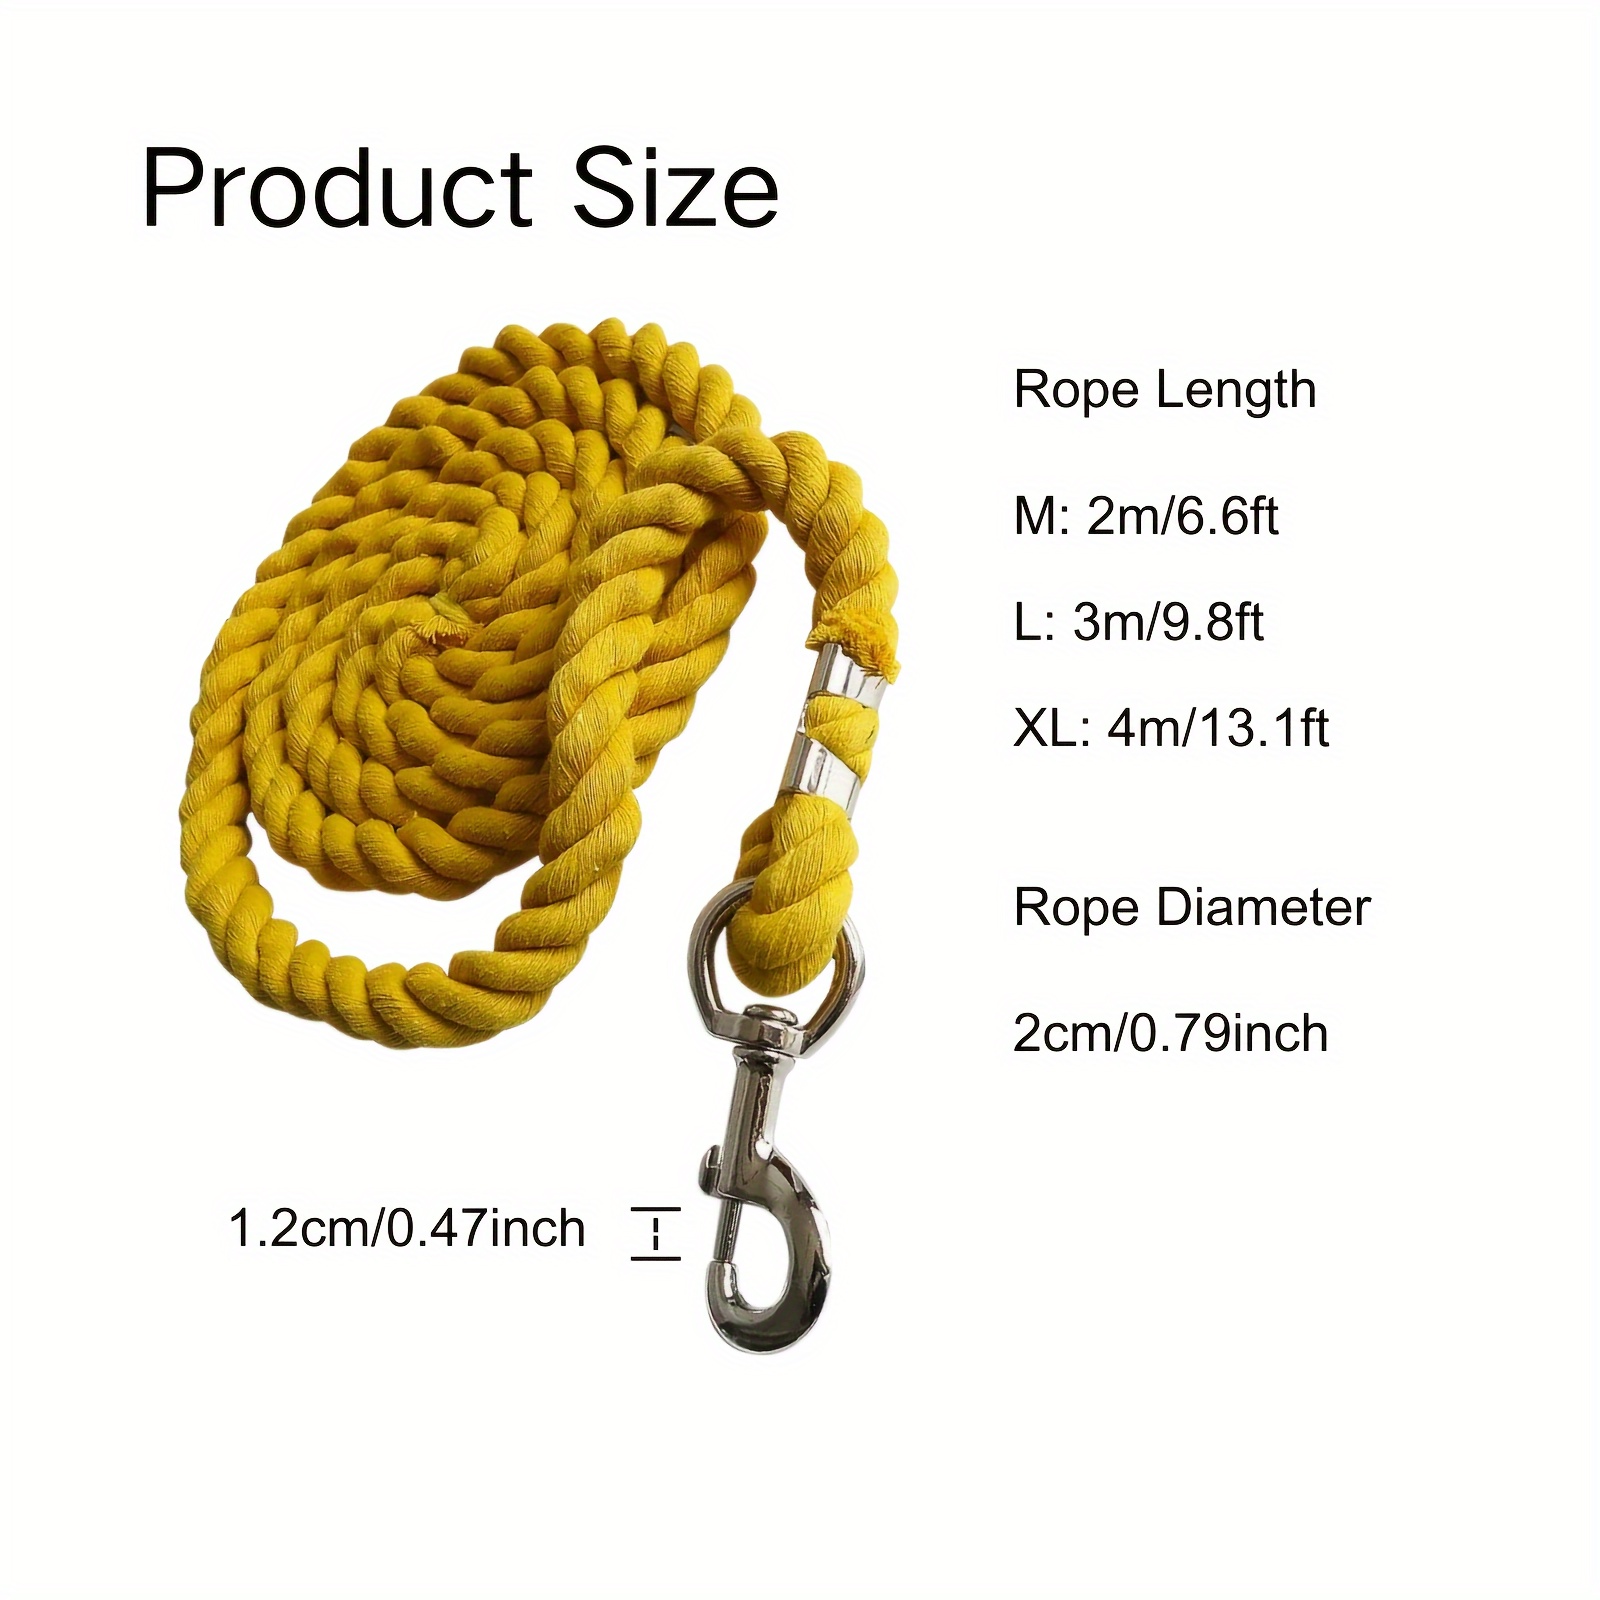 Durable Cotton Horse & Large Dog Leash - Comfort Grip, Easy Control for Horses and Big Breeds